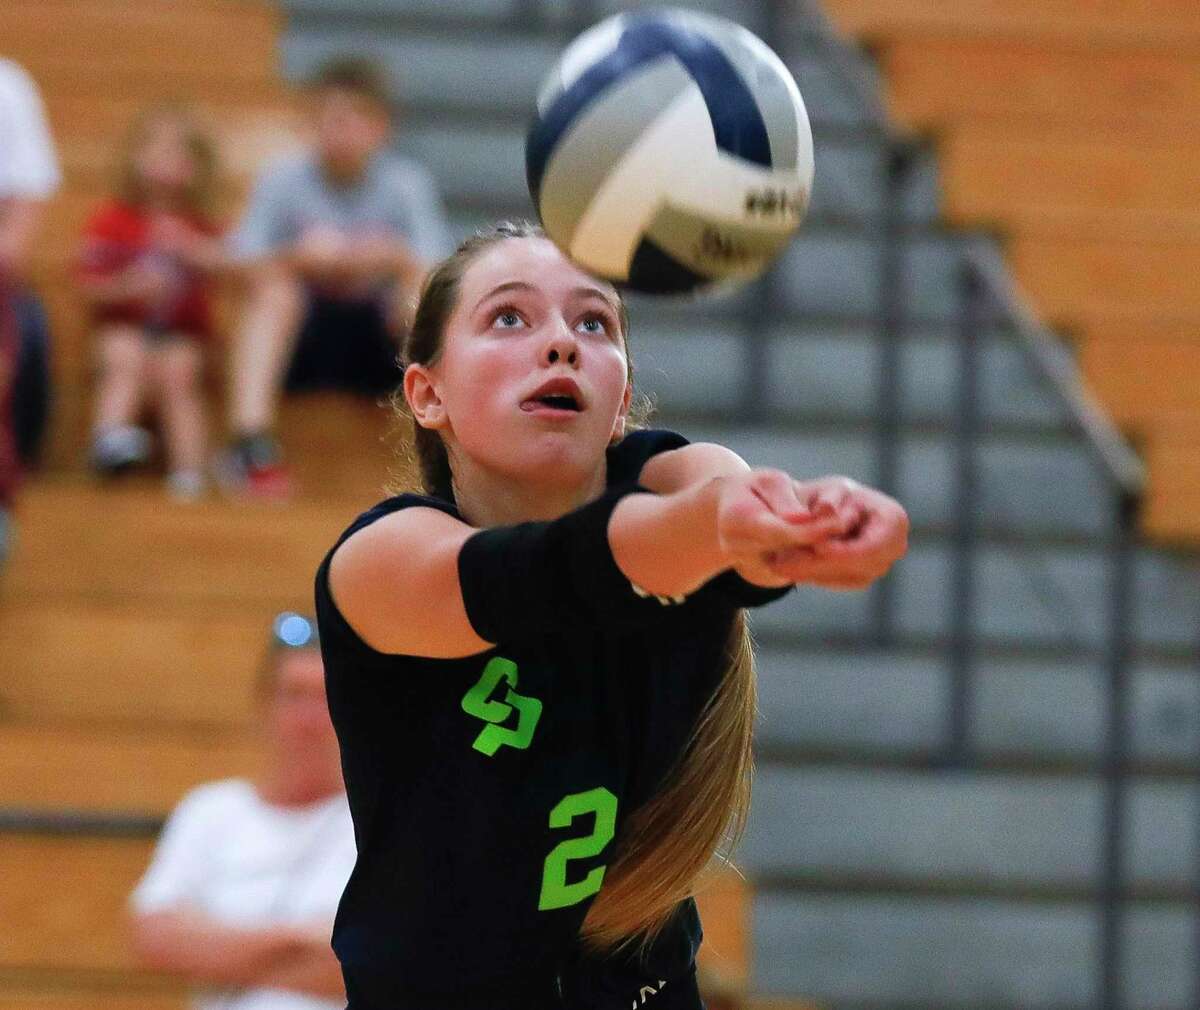 College Park’s Morgan Madison (2) returns a hit during the first set of a high school volleyball match at The Woodlands High School, Tuesday, Oct. 5, 2021, in The Woodlands.